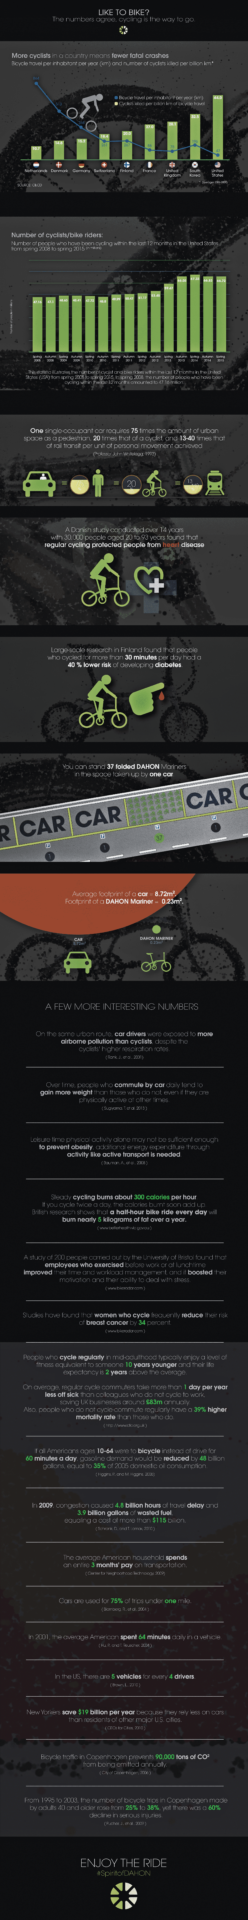 benefits of cycling infographic by dahon folding bikes